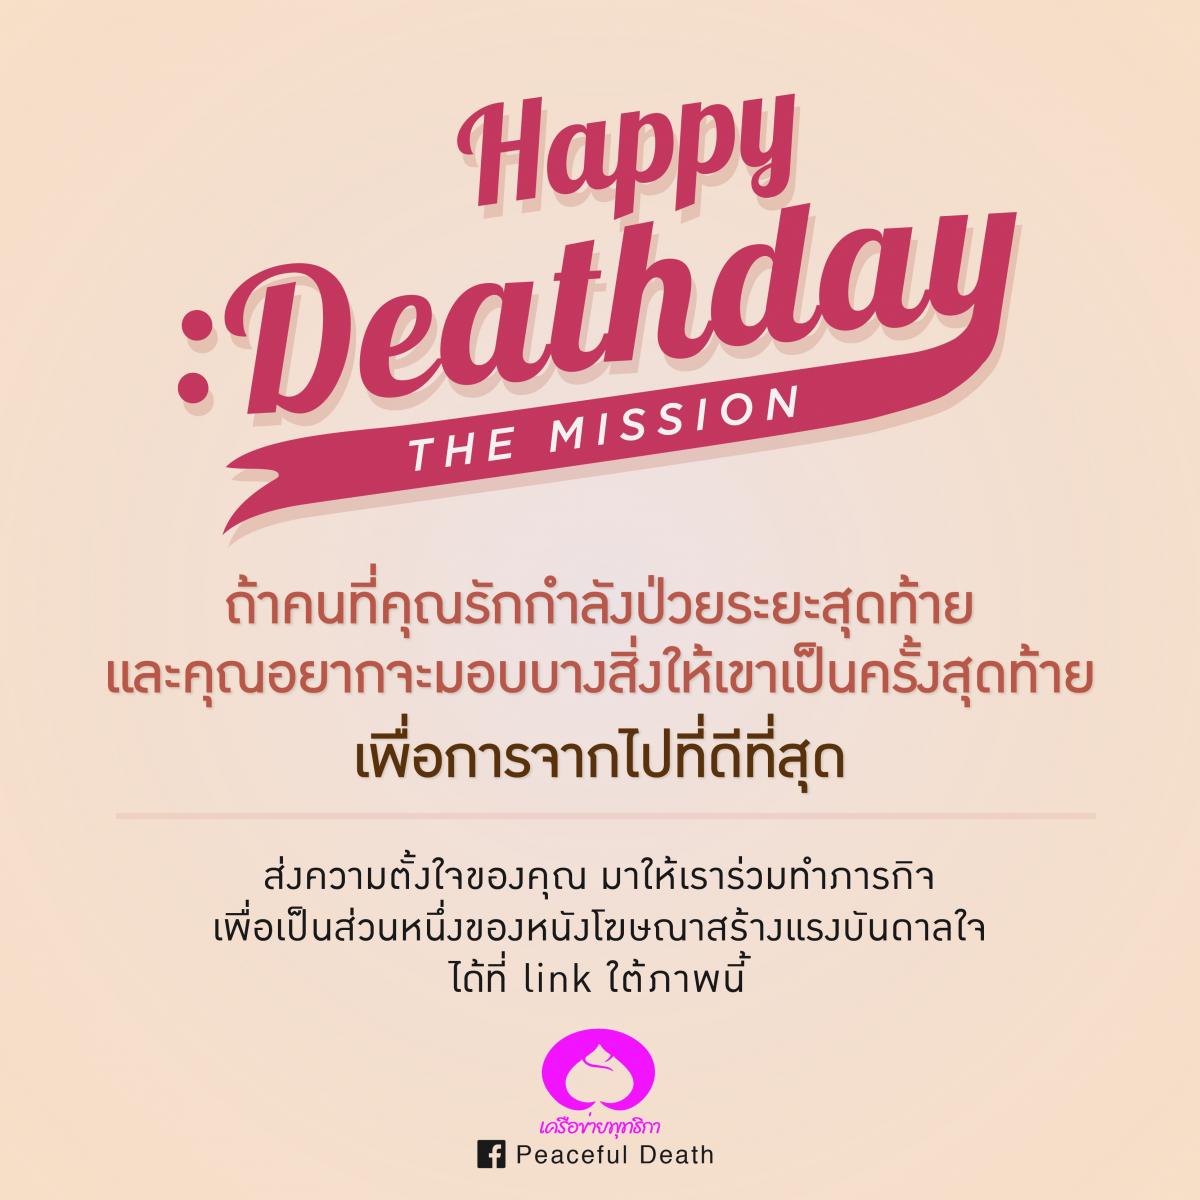 Happy Death Day The mission